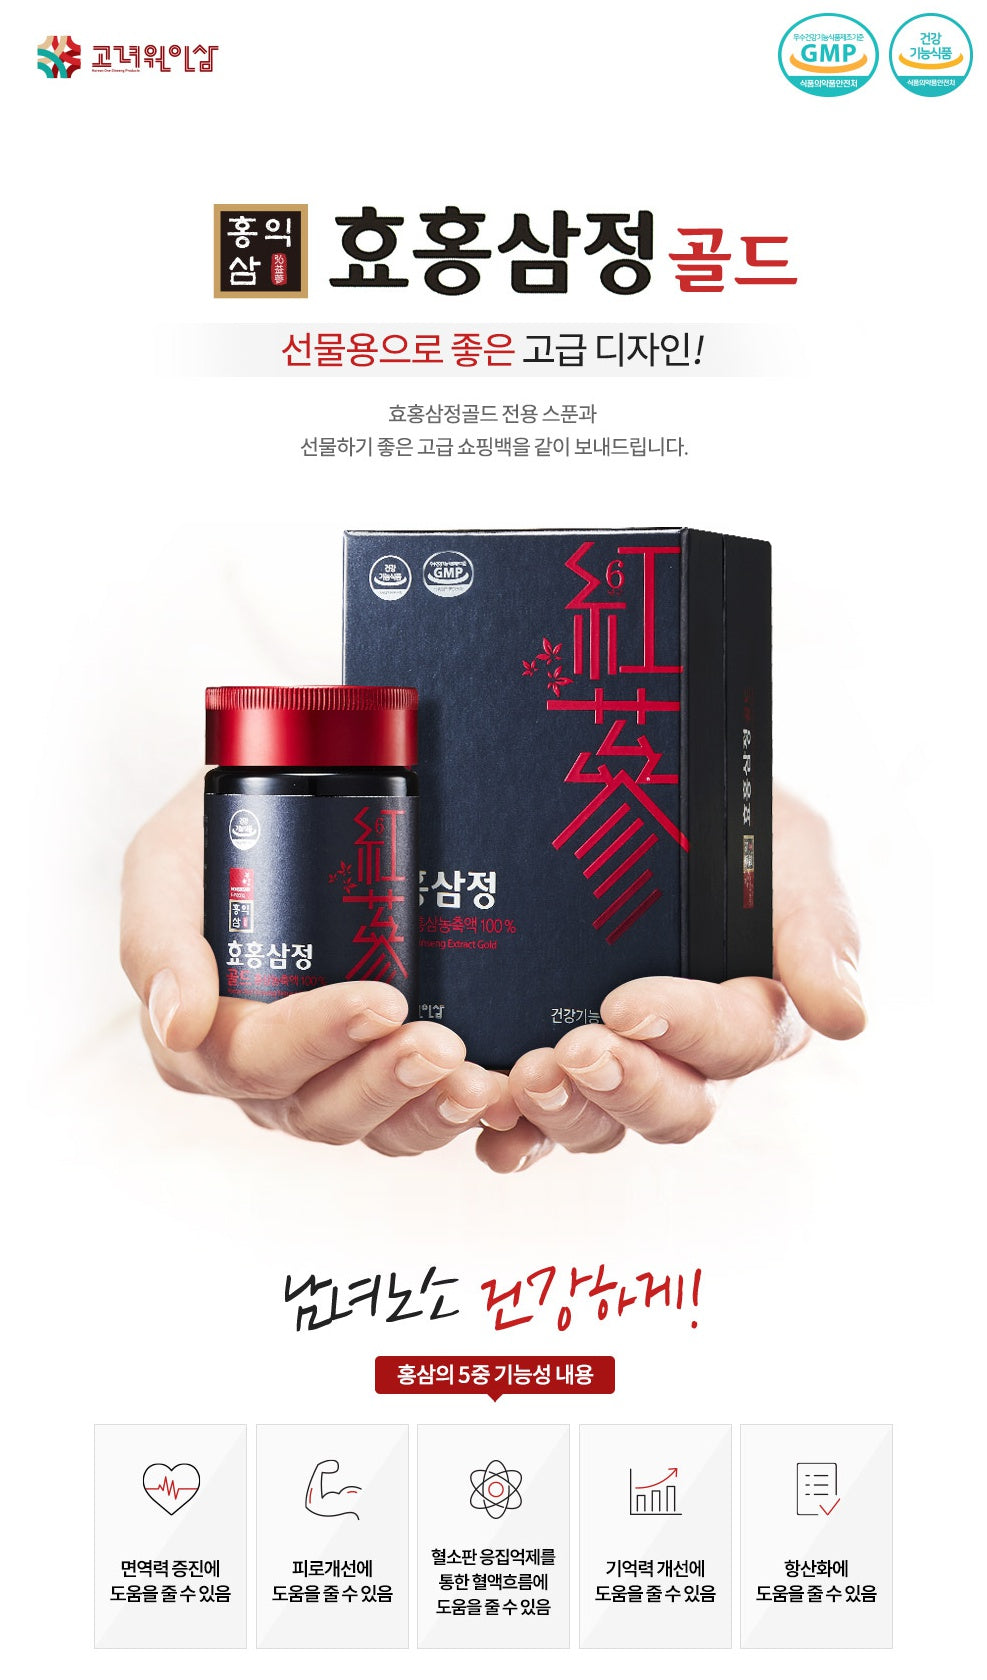 Korean Hyo Red Ginseng Extract Gold 100% Pure Premium Health Gifts